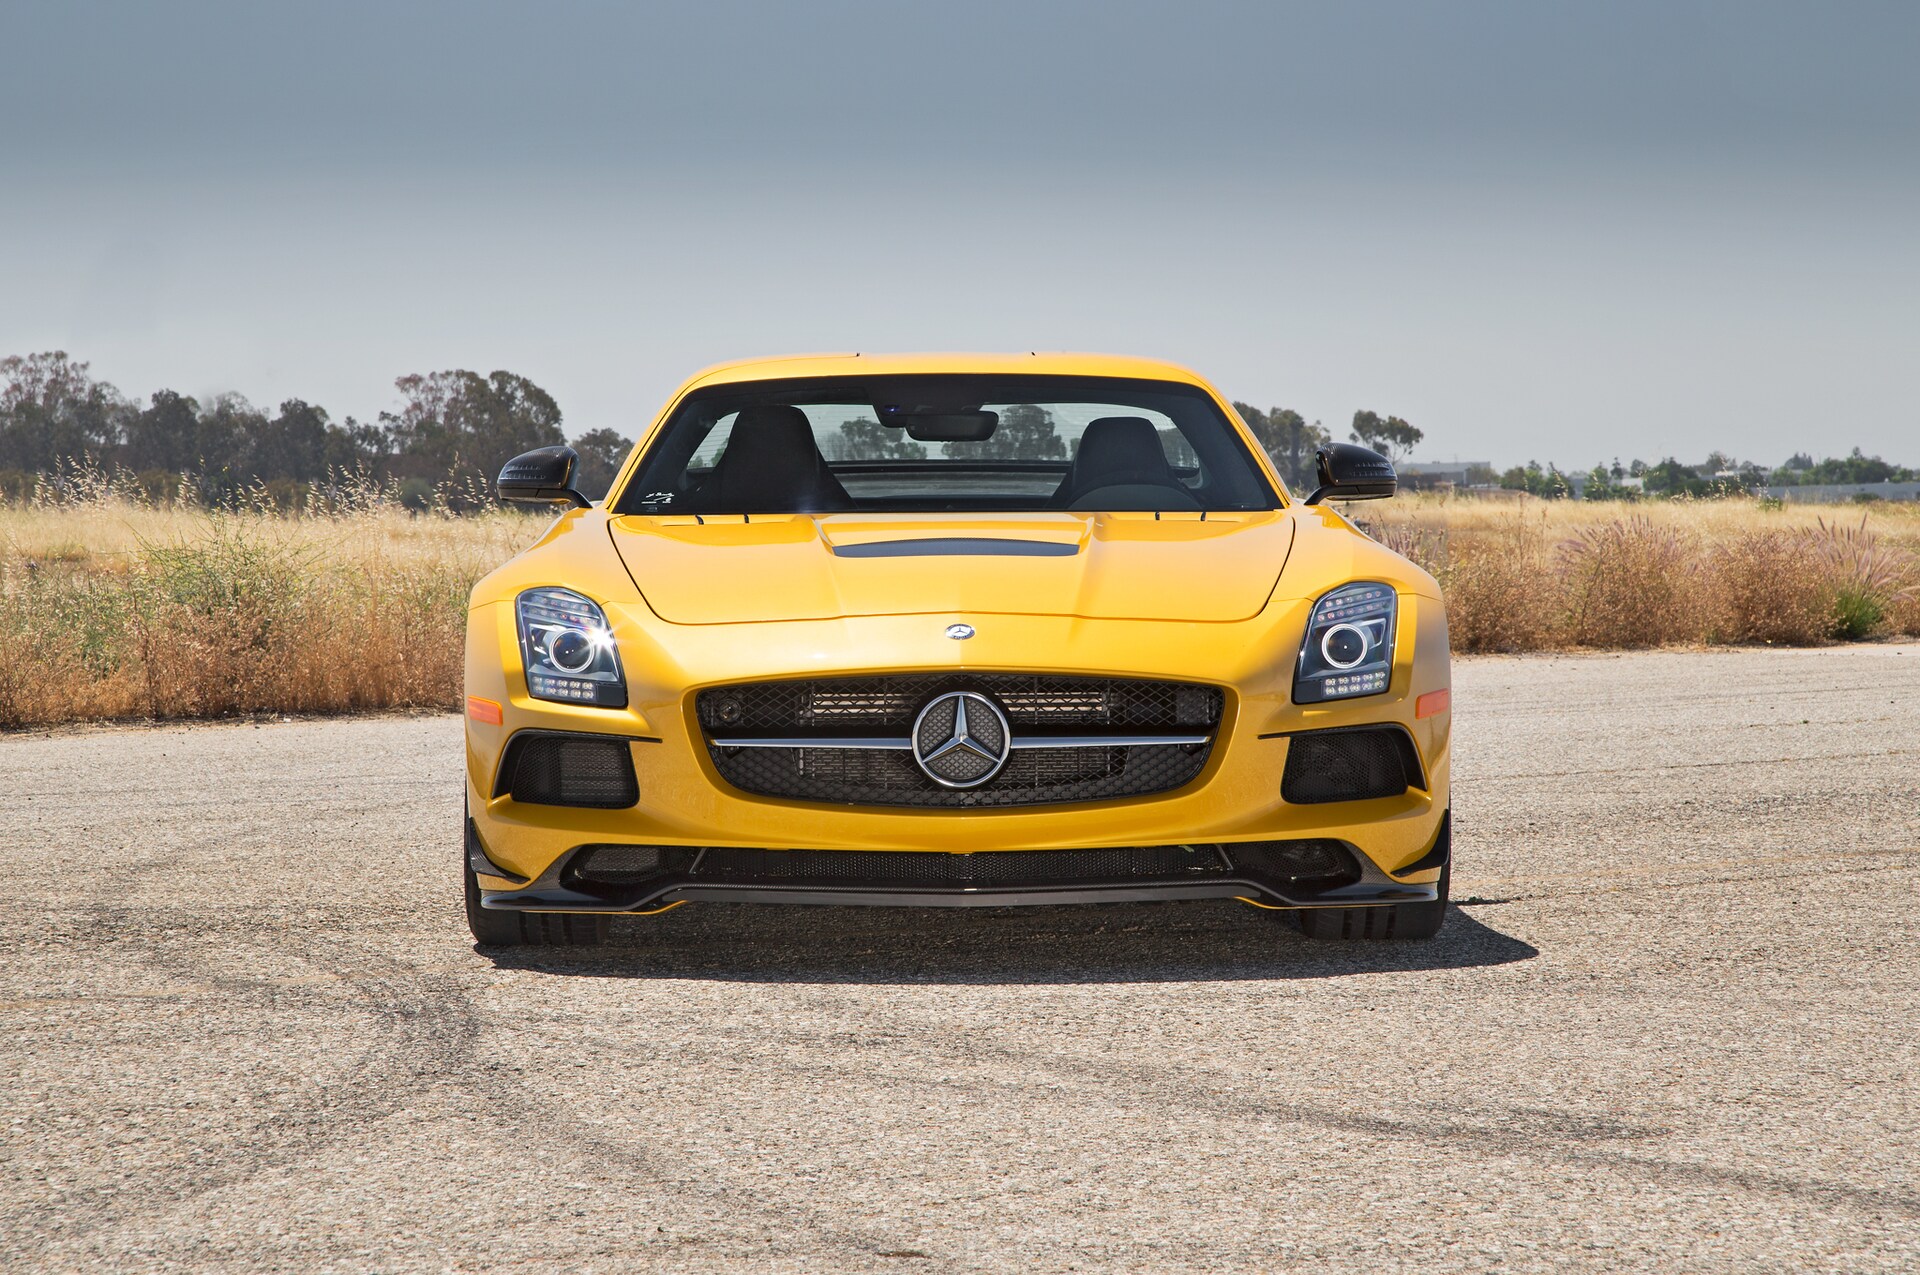 frontal view of a yellow 2014 Mercedes Benz SLS AMG Black Series